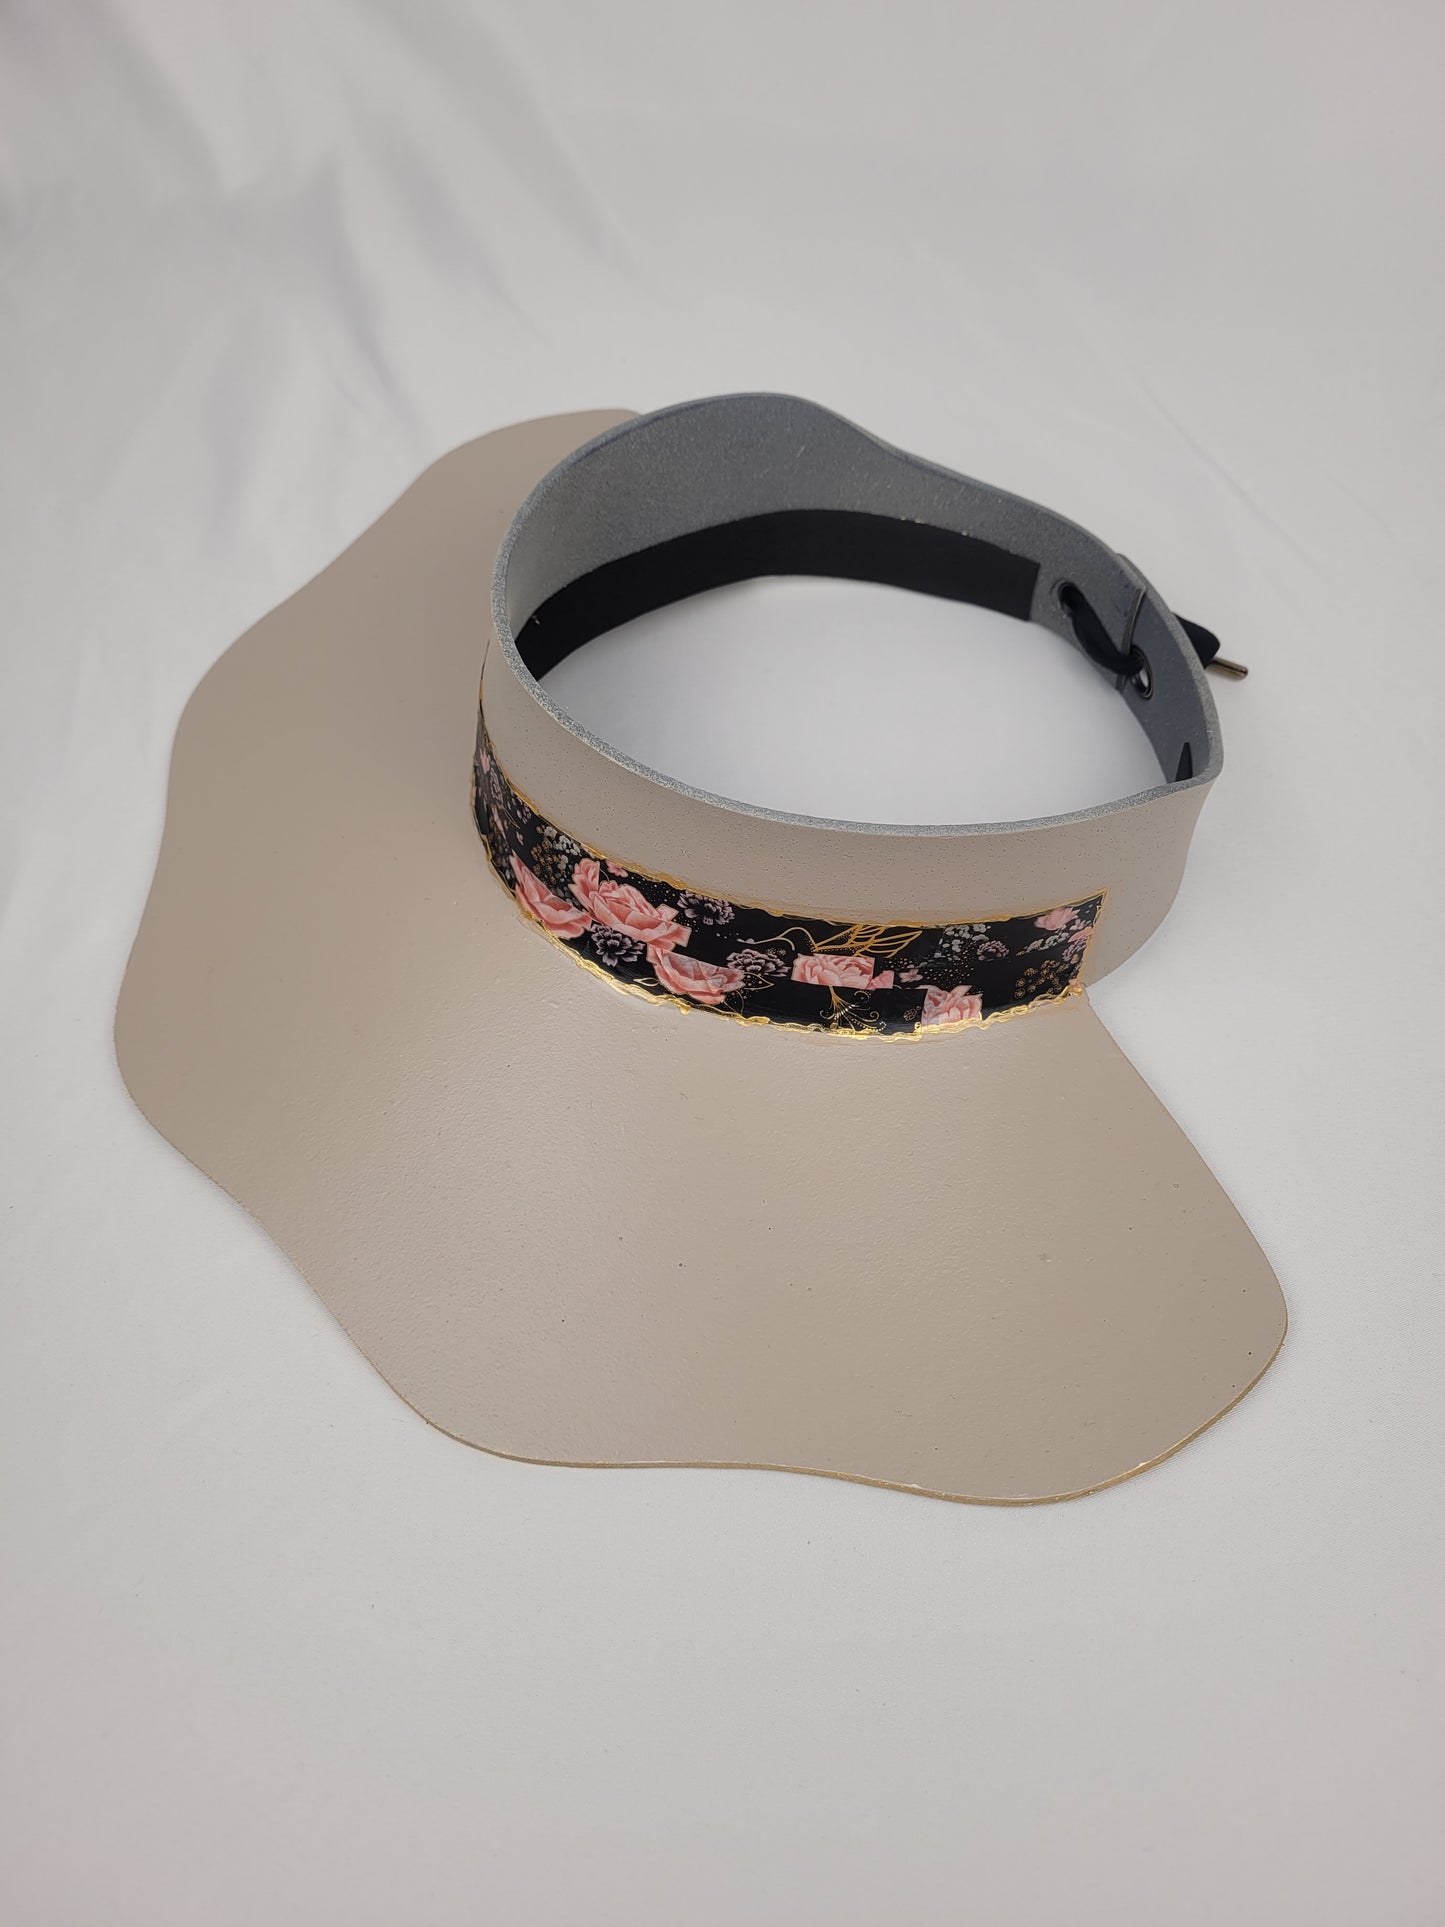 Elegant Taupe Lotus Sun Visor Hat with Sophisticated Black and Golden Band: Sport, Golf, Everyday Protection